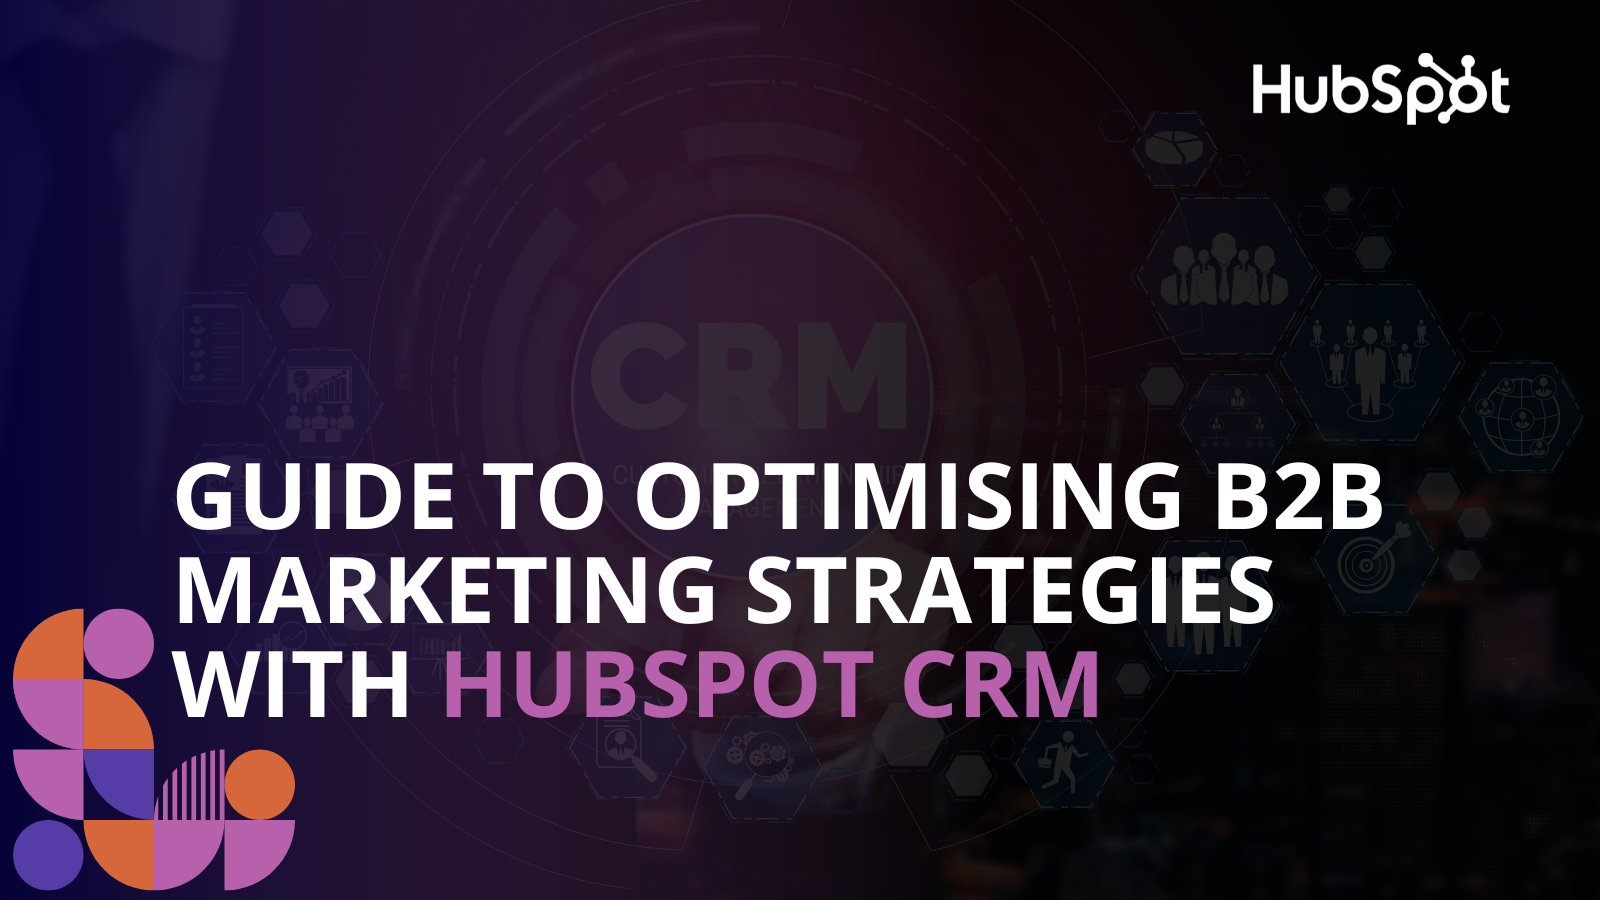 Guide to Optimising B2B Marketing Strategies with HubSpot CRM